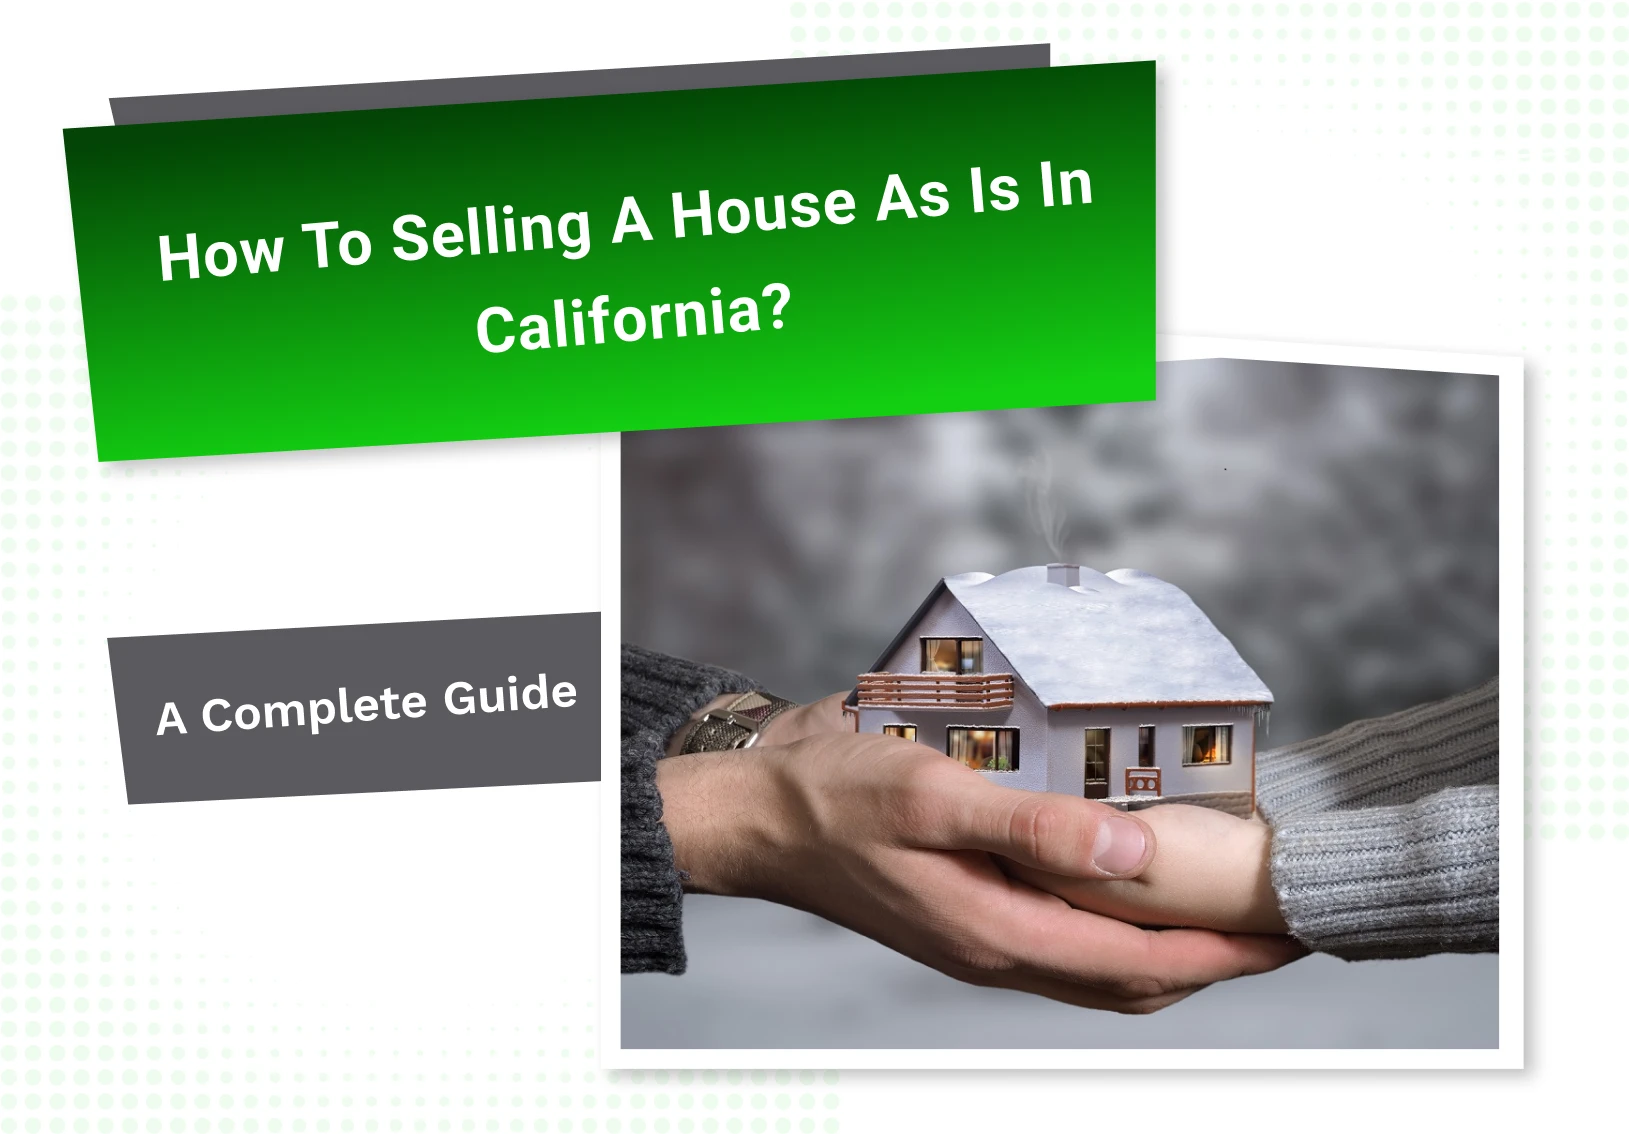 How to Sell a house as is in California?